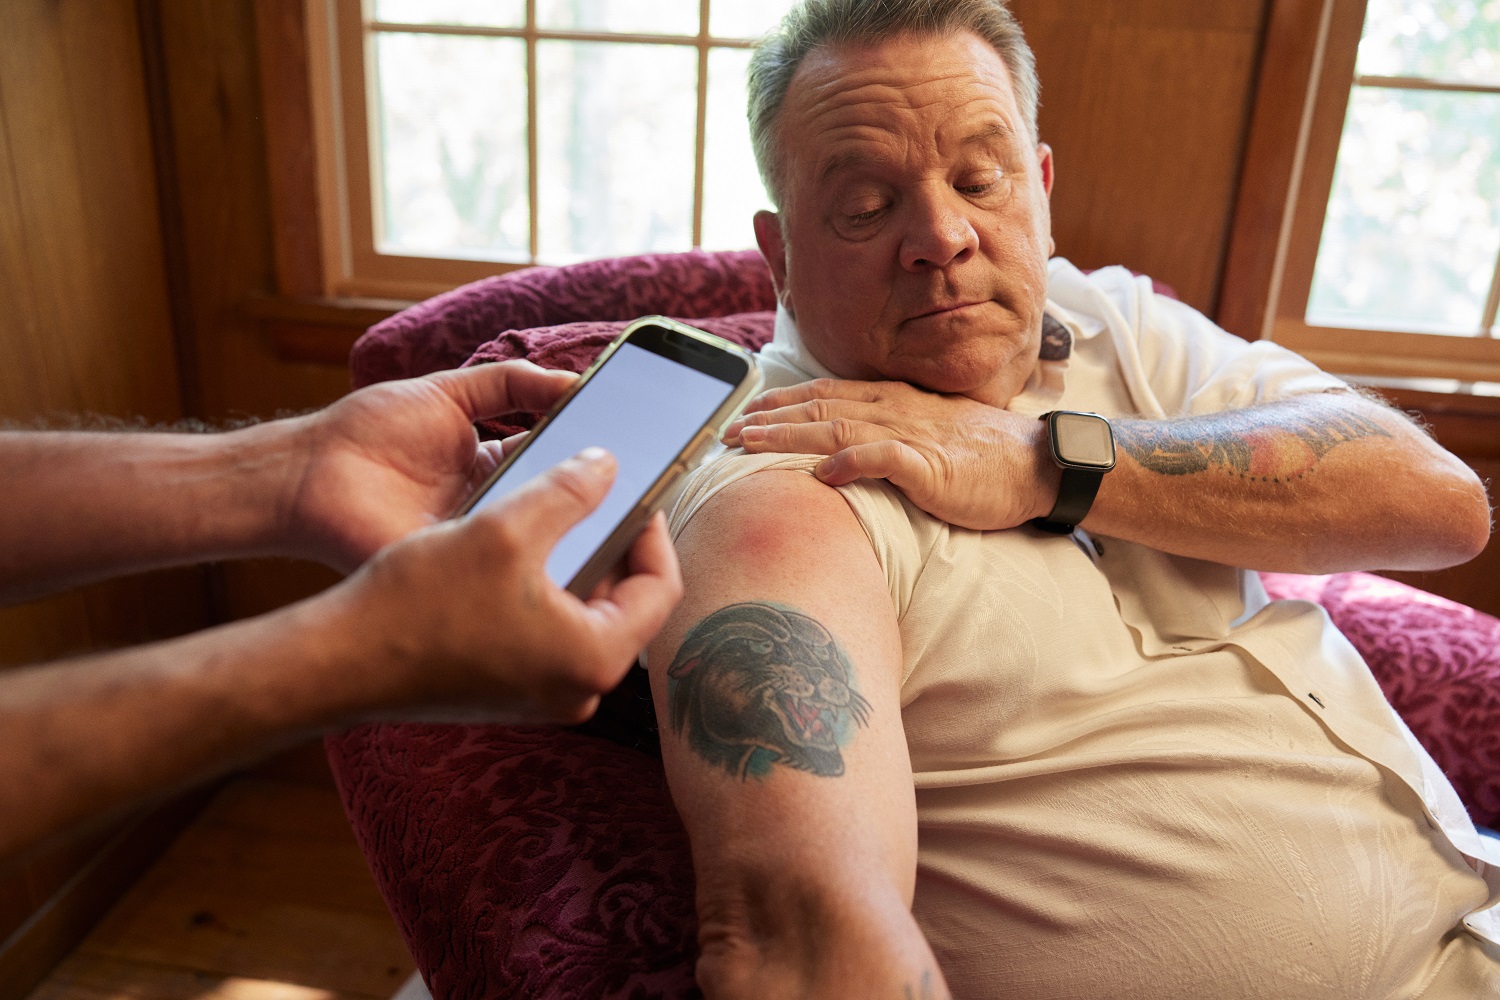 Older man sitting in a chair rolls up his sleeve for caregiver to take picture of arm